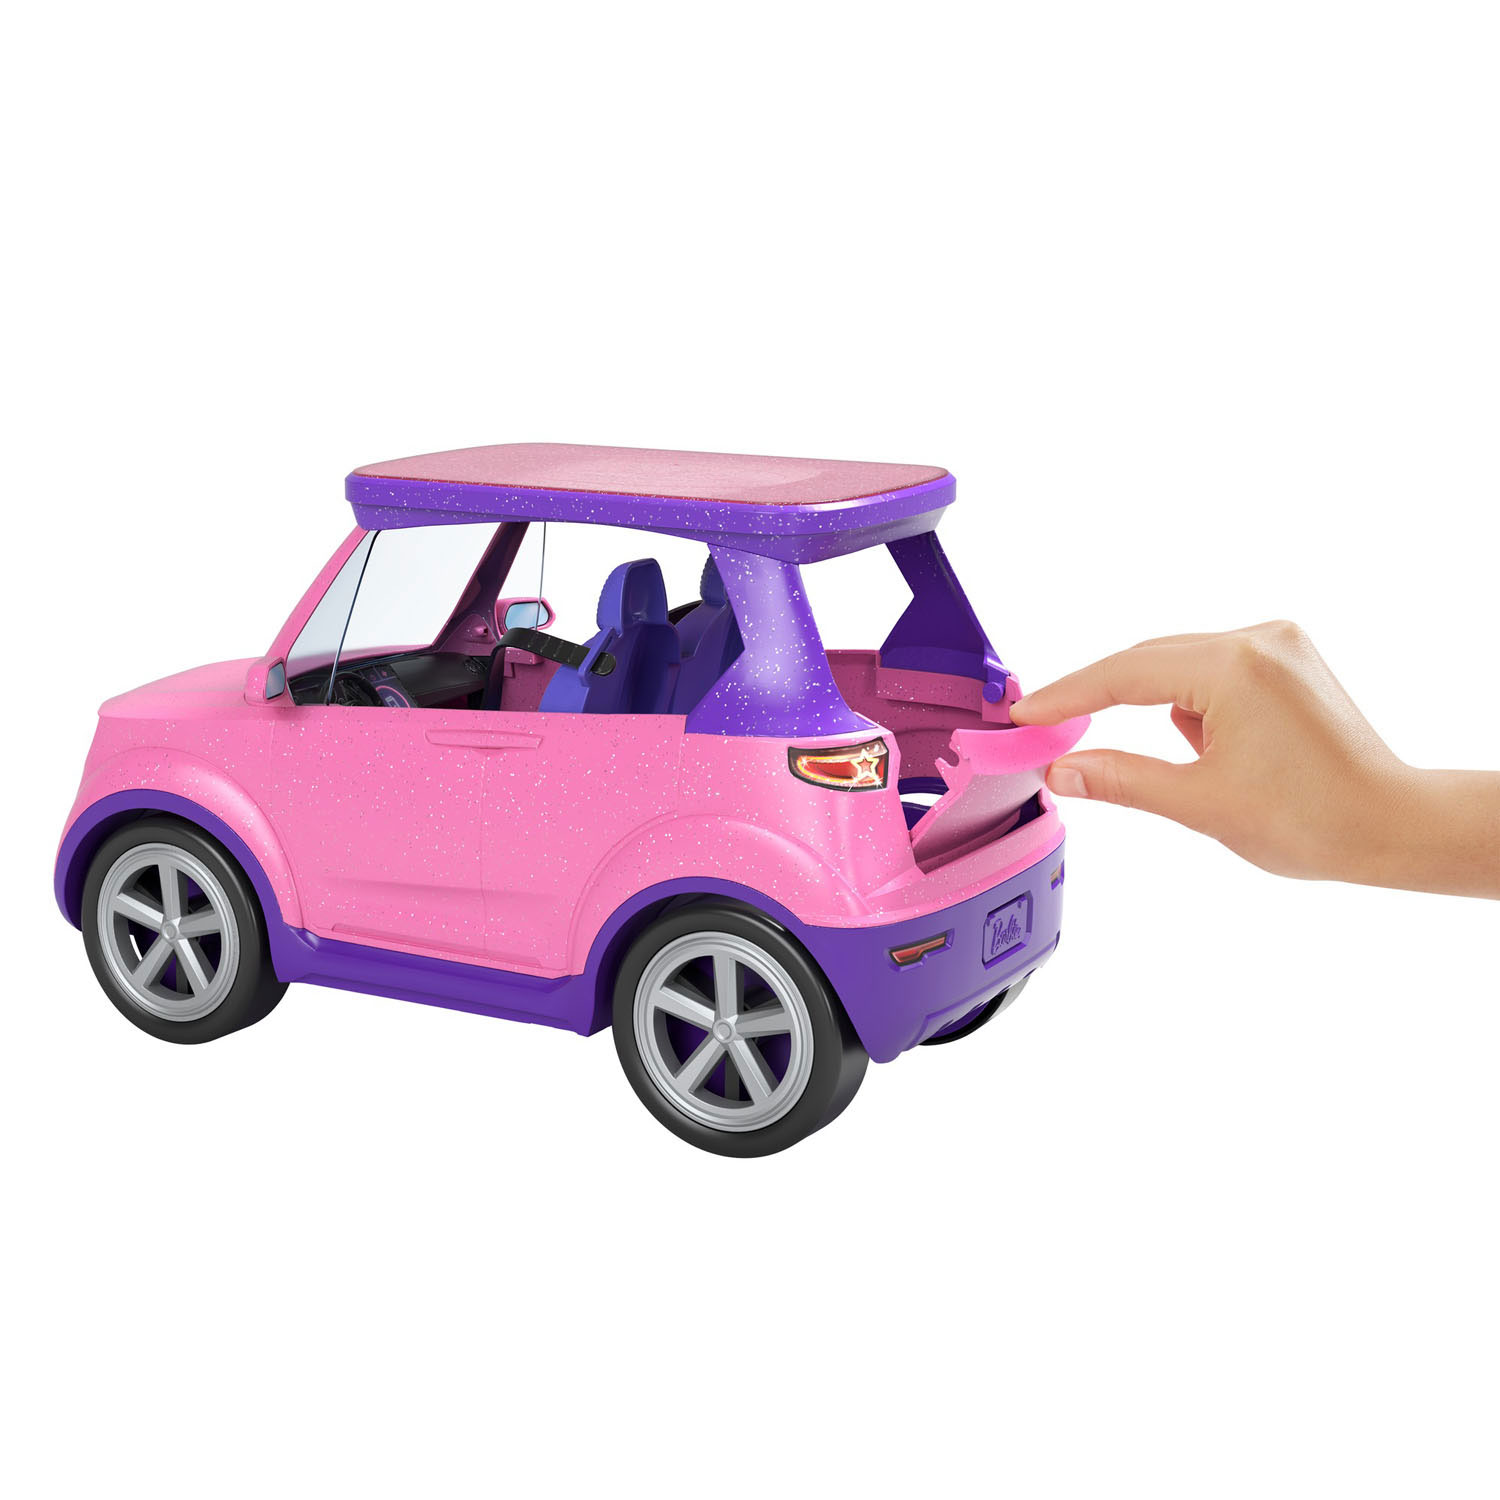 Silverlit toys Disney Princesses Pink battery operated car SUV